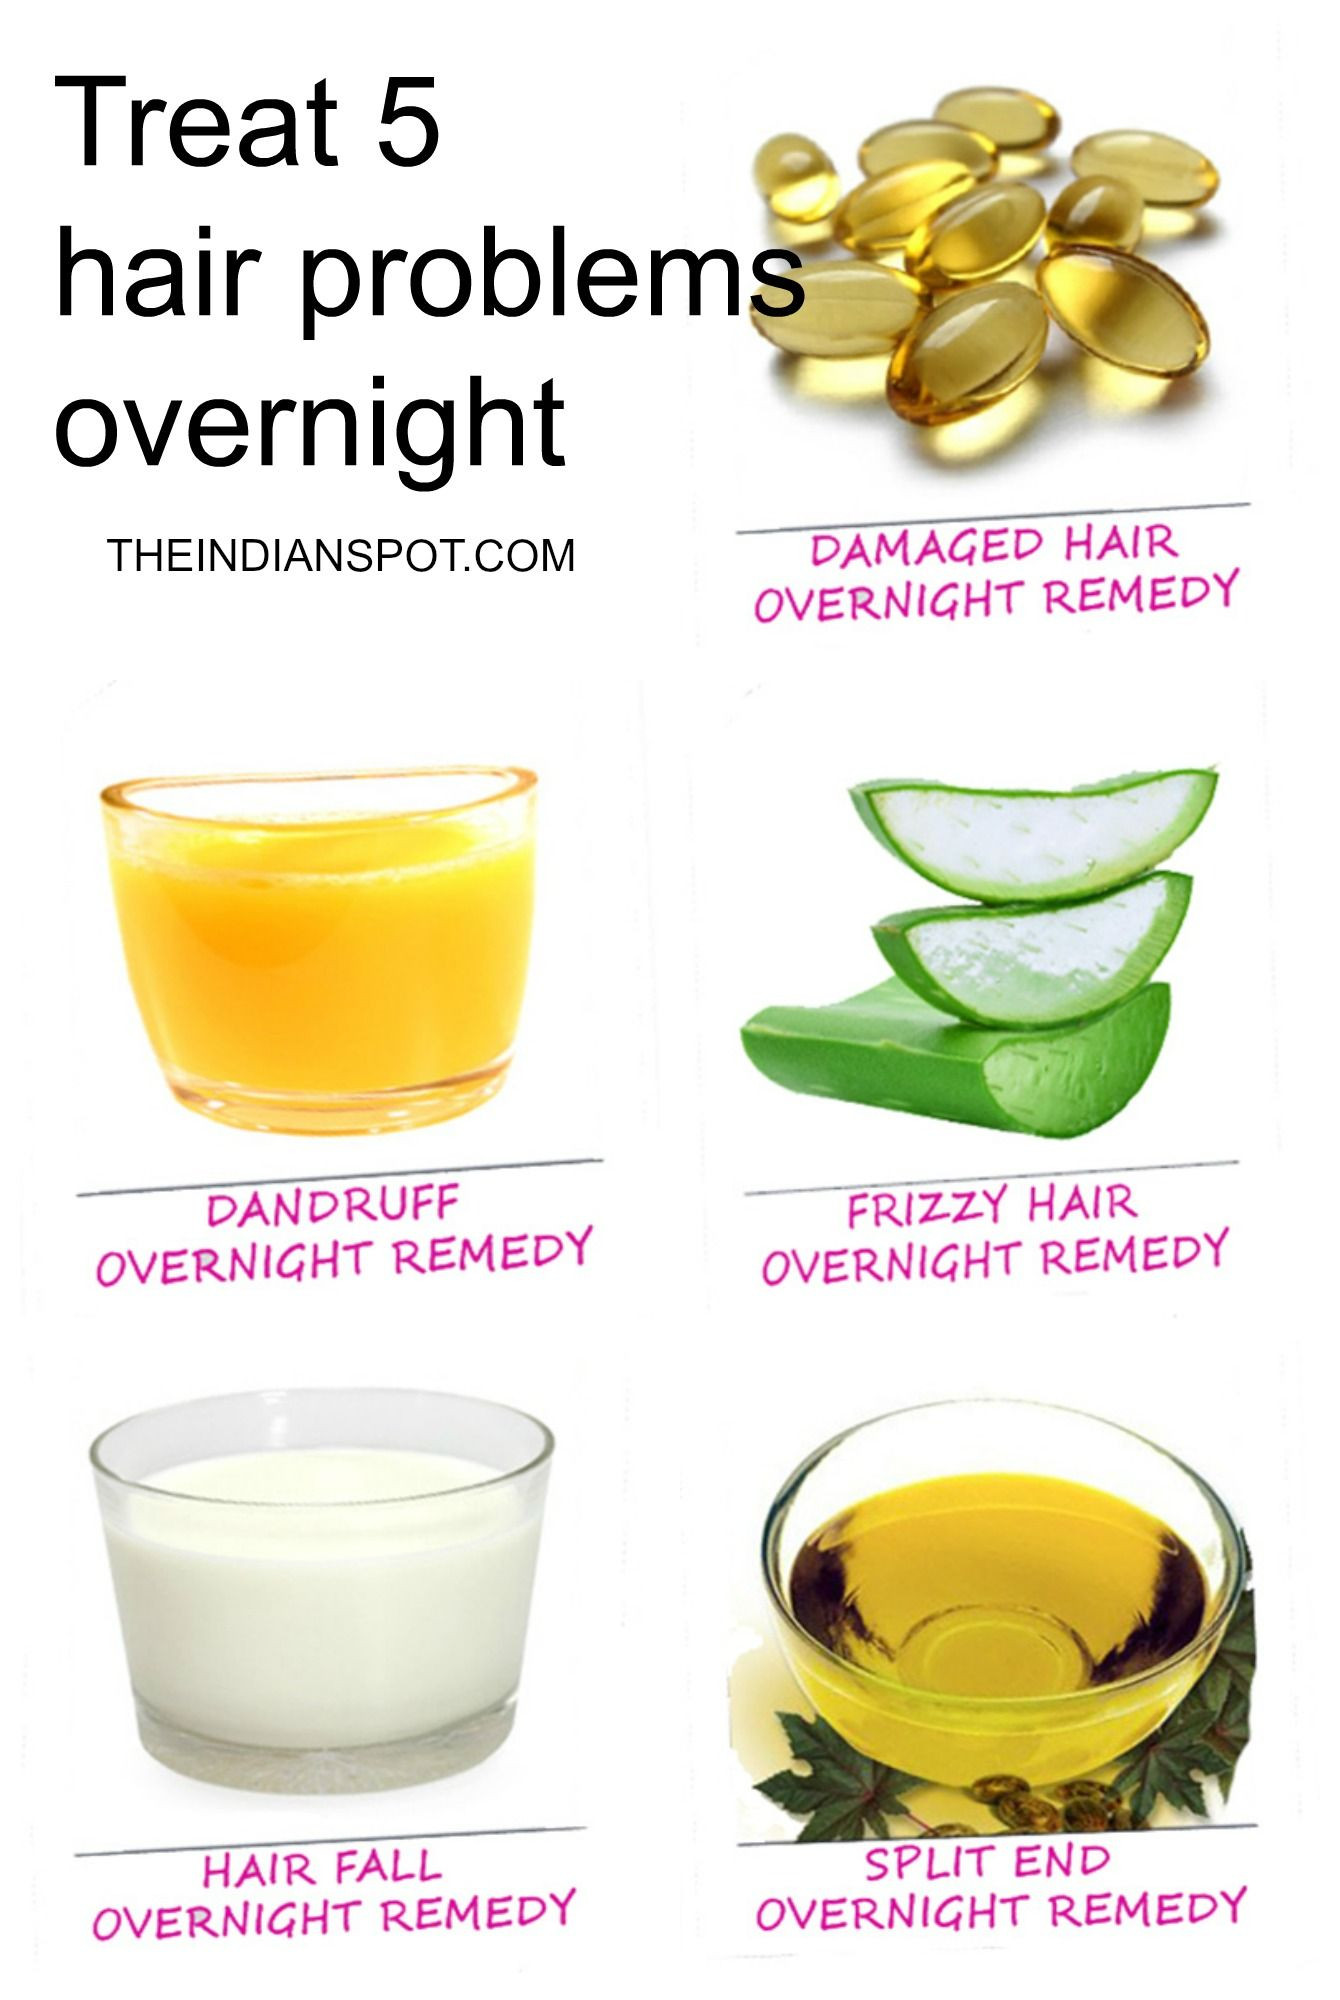 DIY Treatment For Damaged Hair
 Treat hair problems overnight with natural reme s